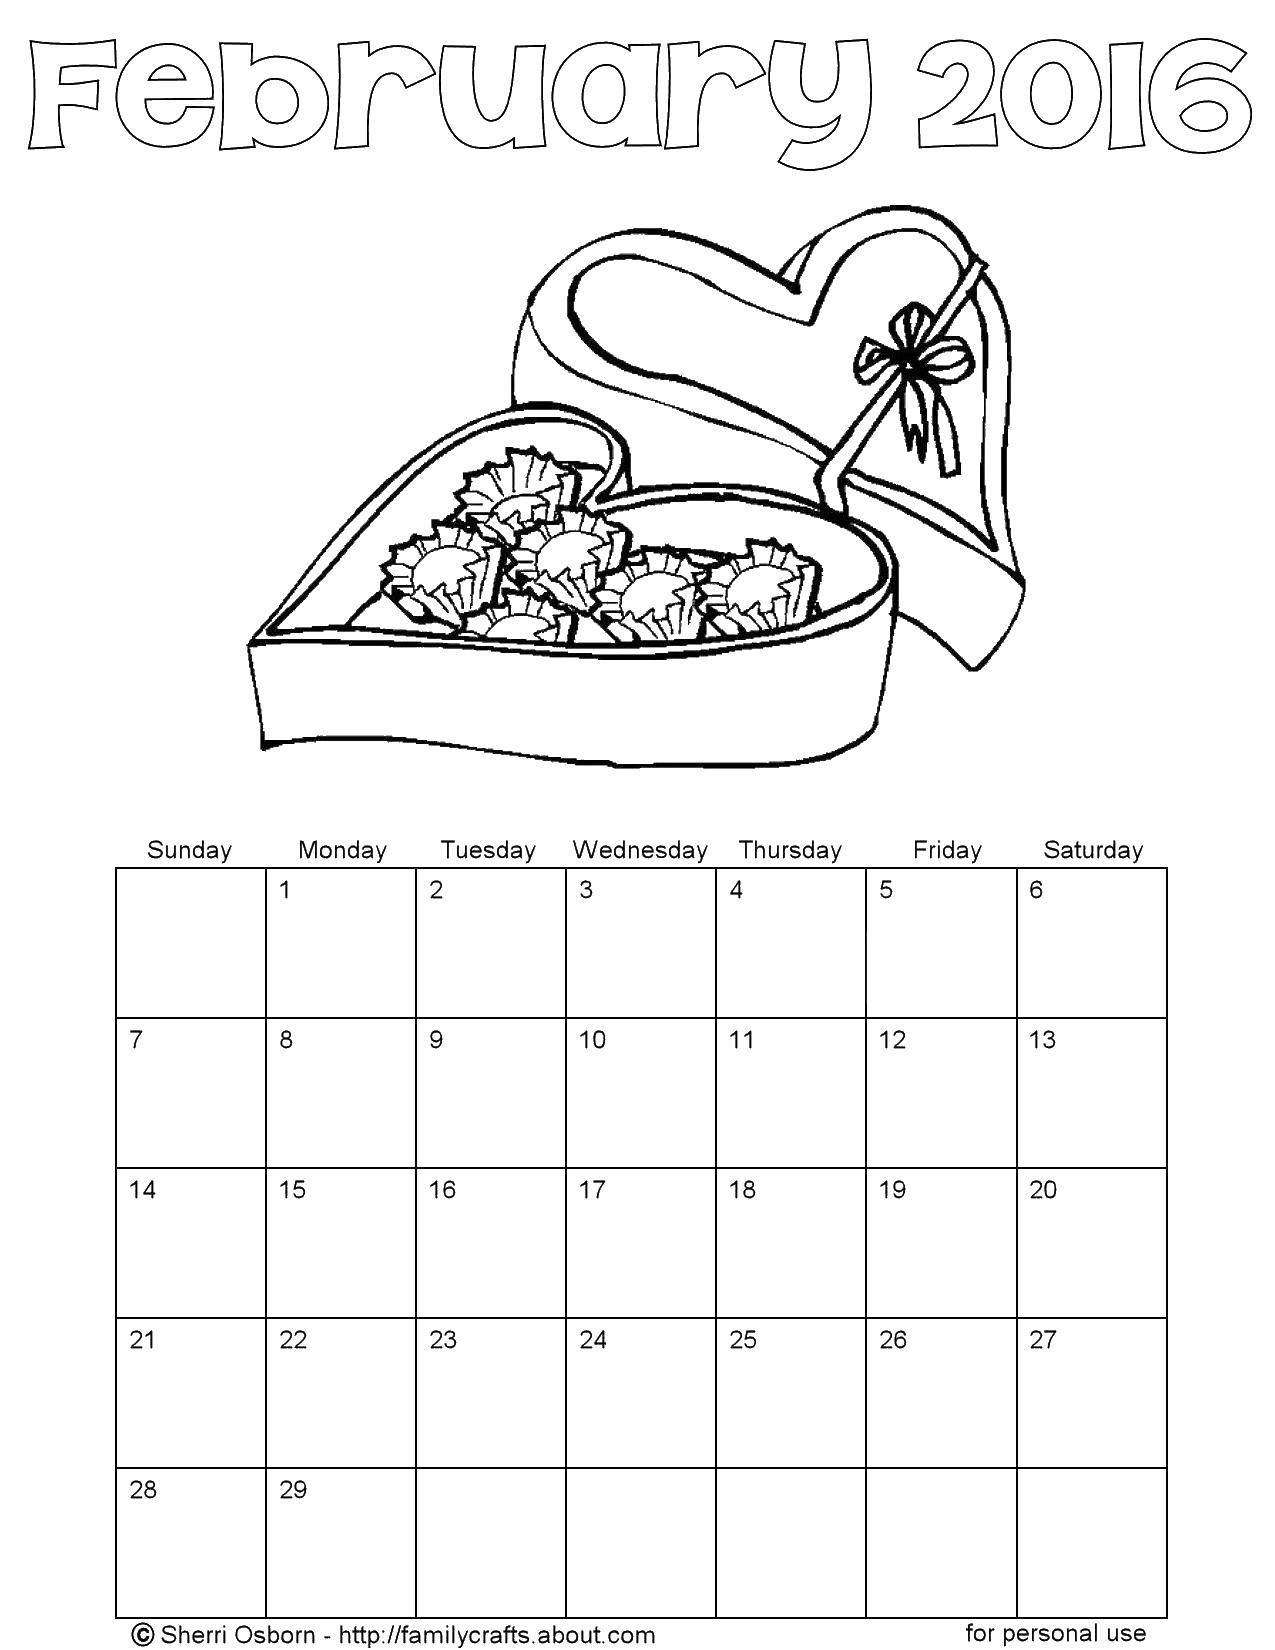 Coloring February and candy. Category Calendar. Tags:  February, candy.